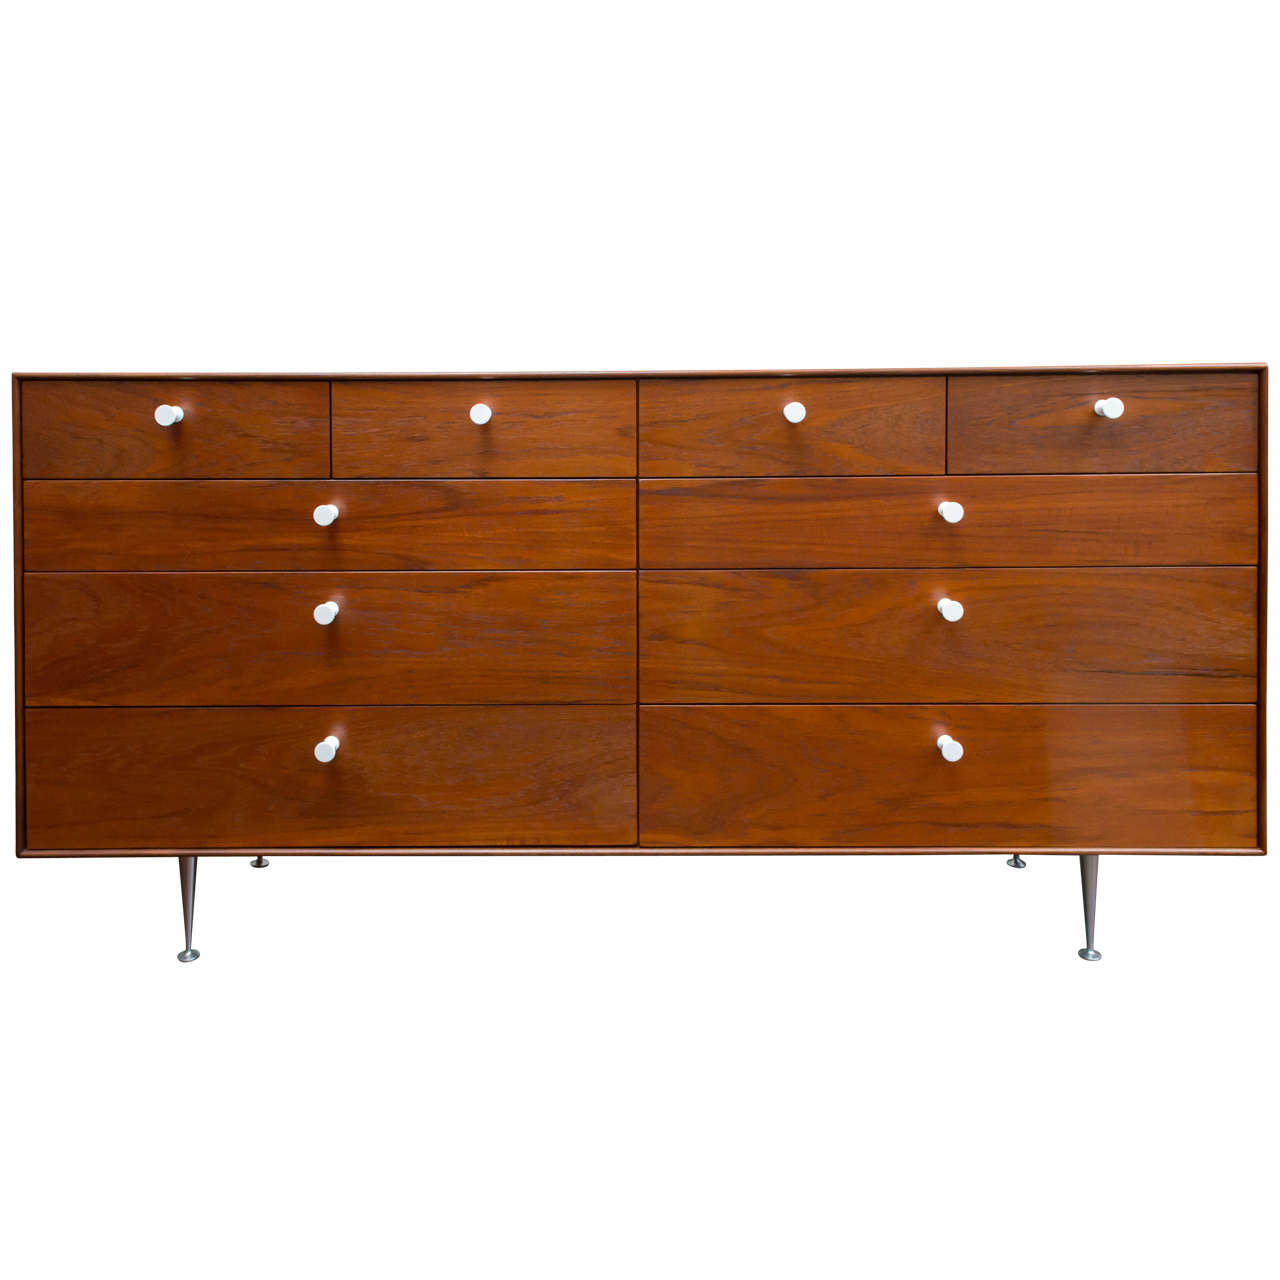 George Nelson "Thin Edge" Chest of Drawers